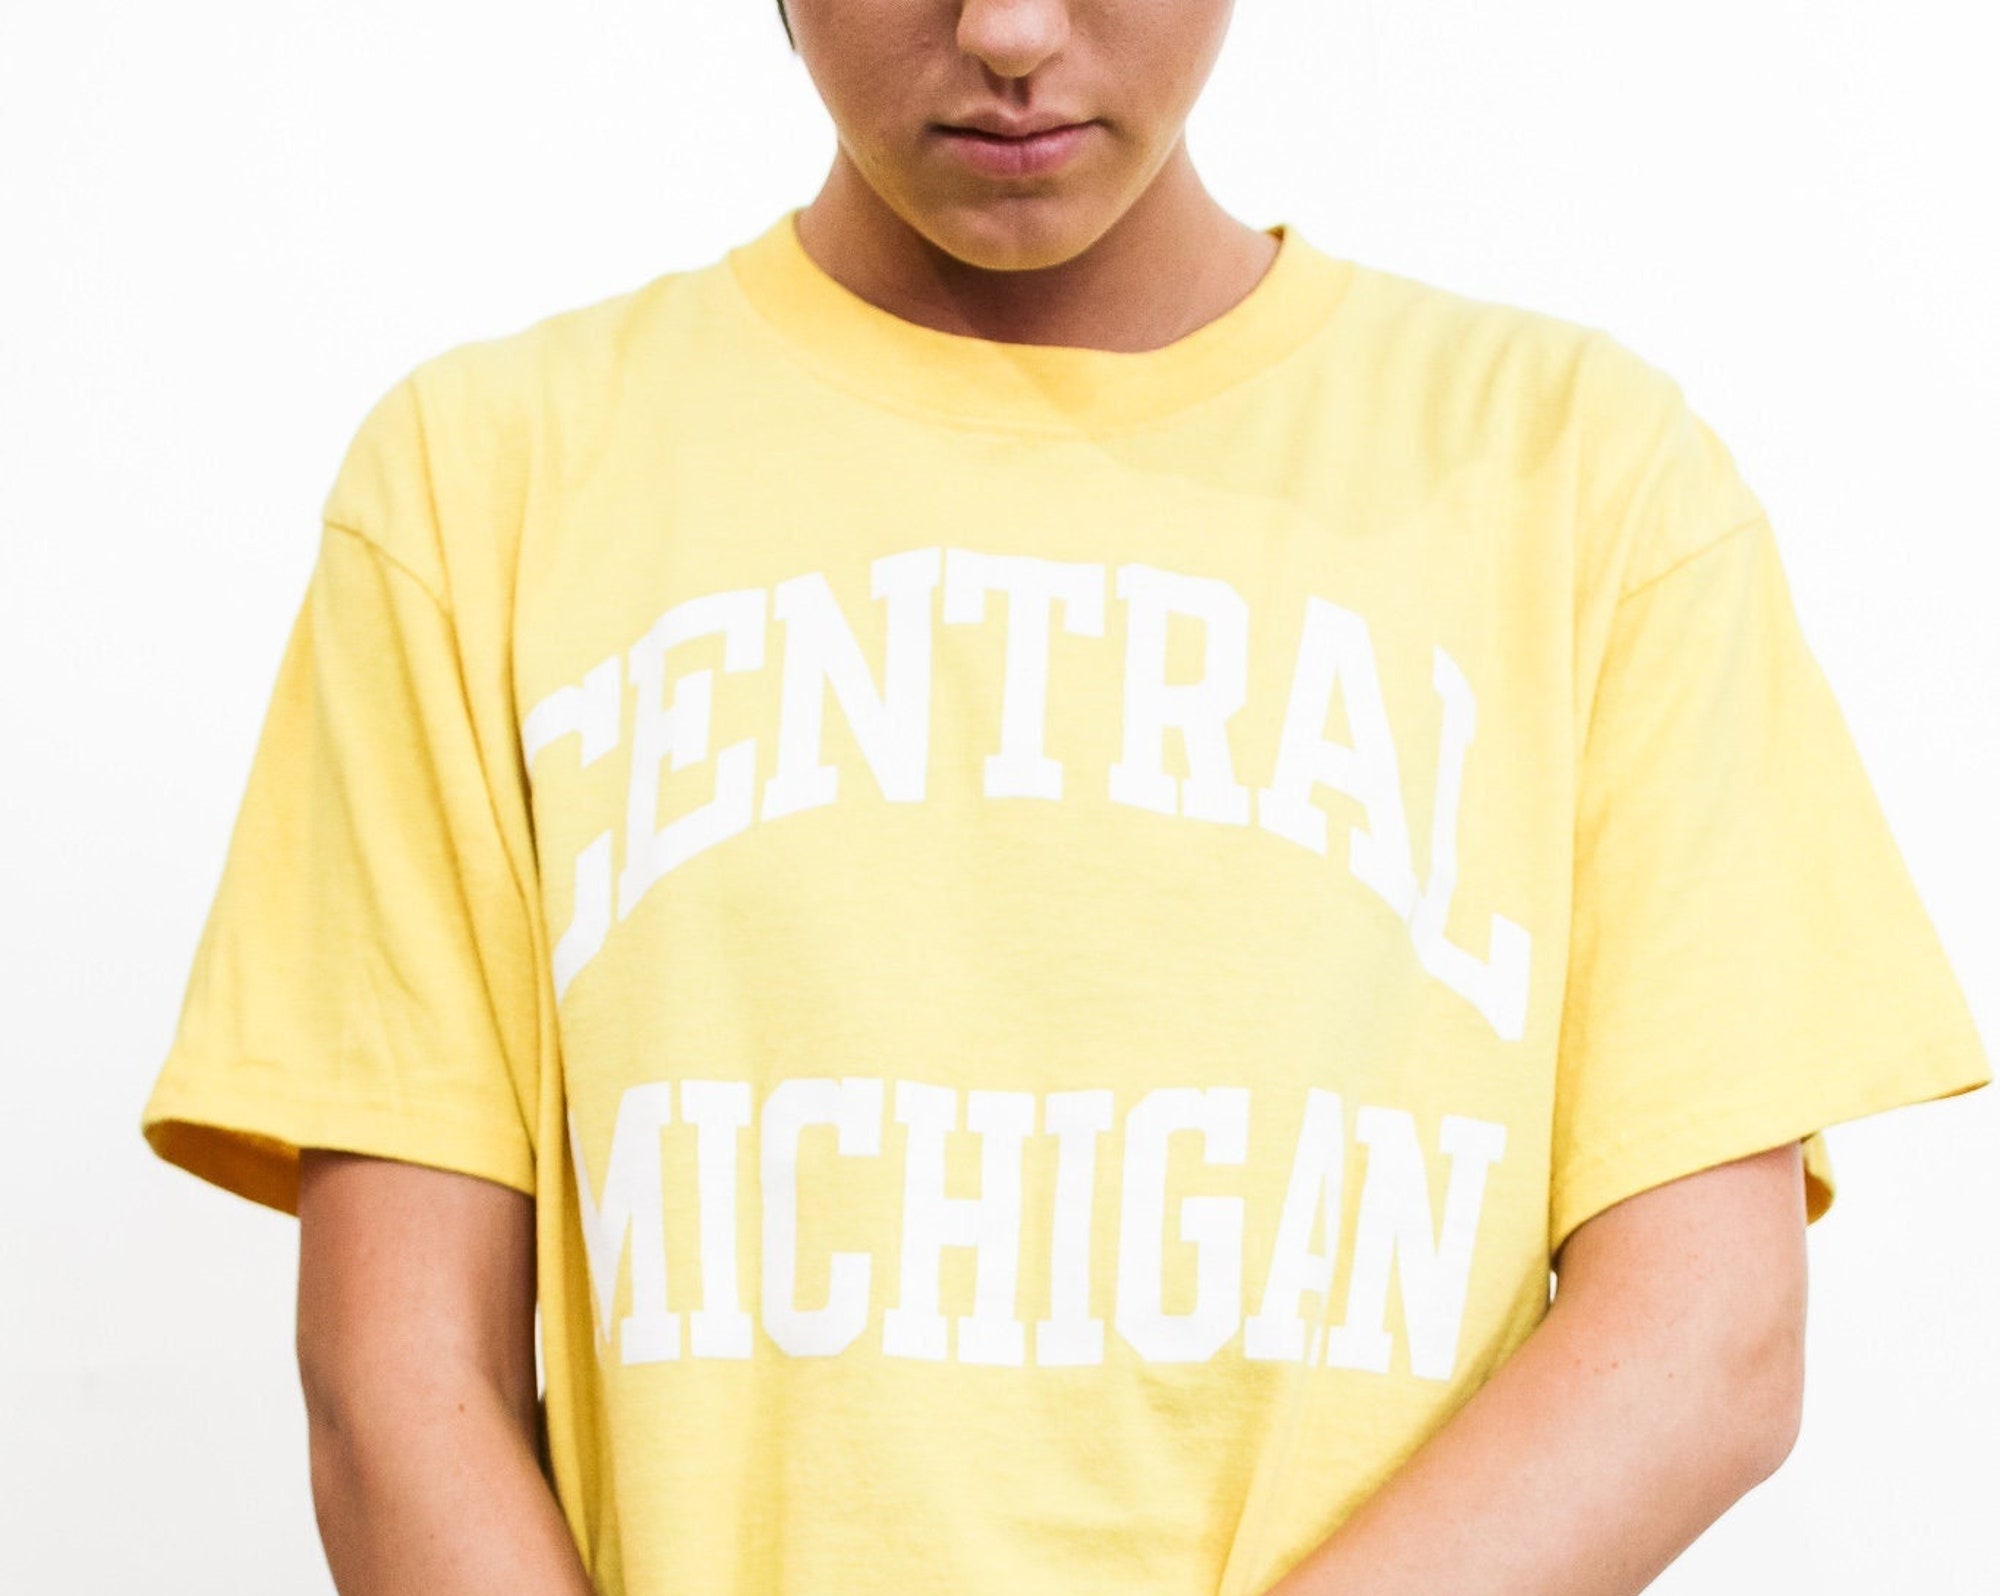 Discover Central Michigan University Tee